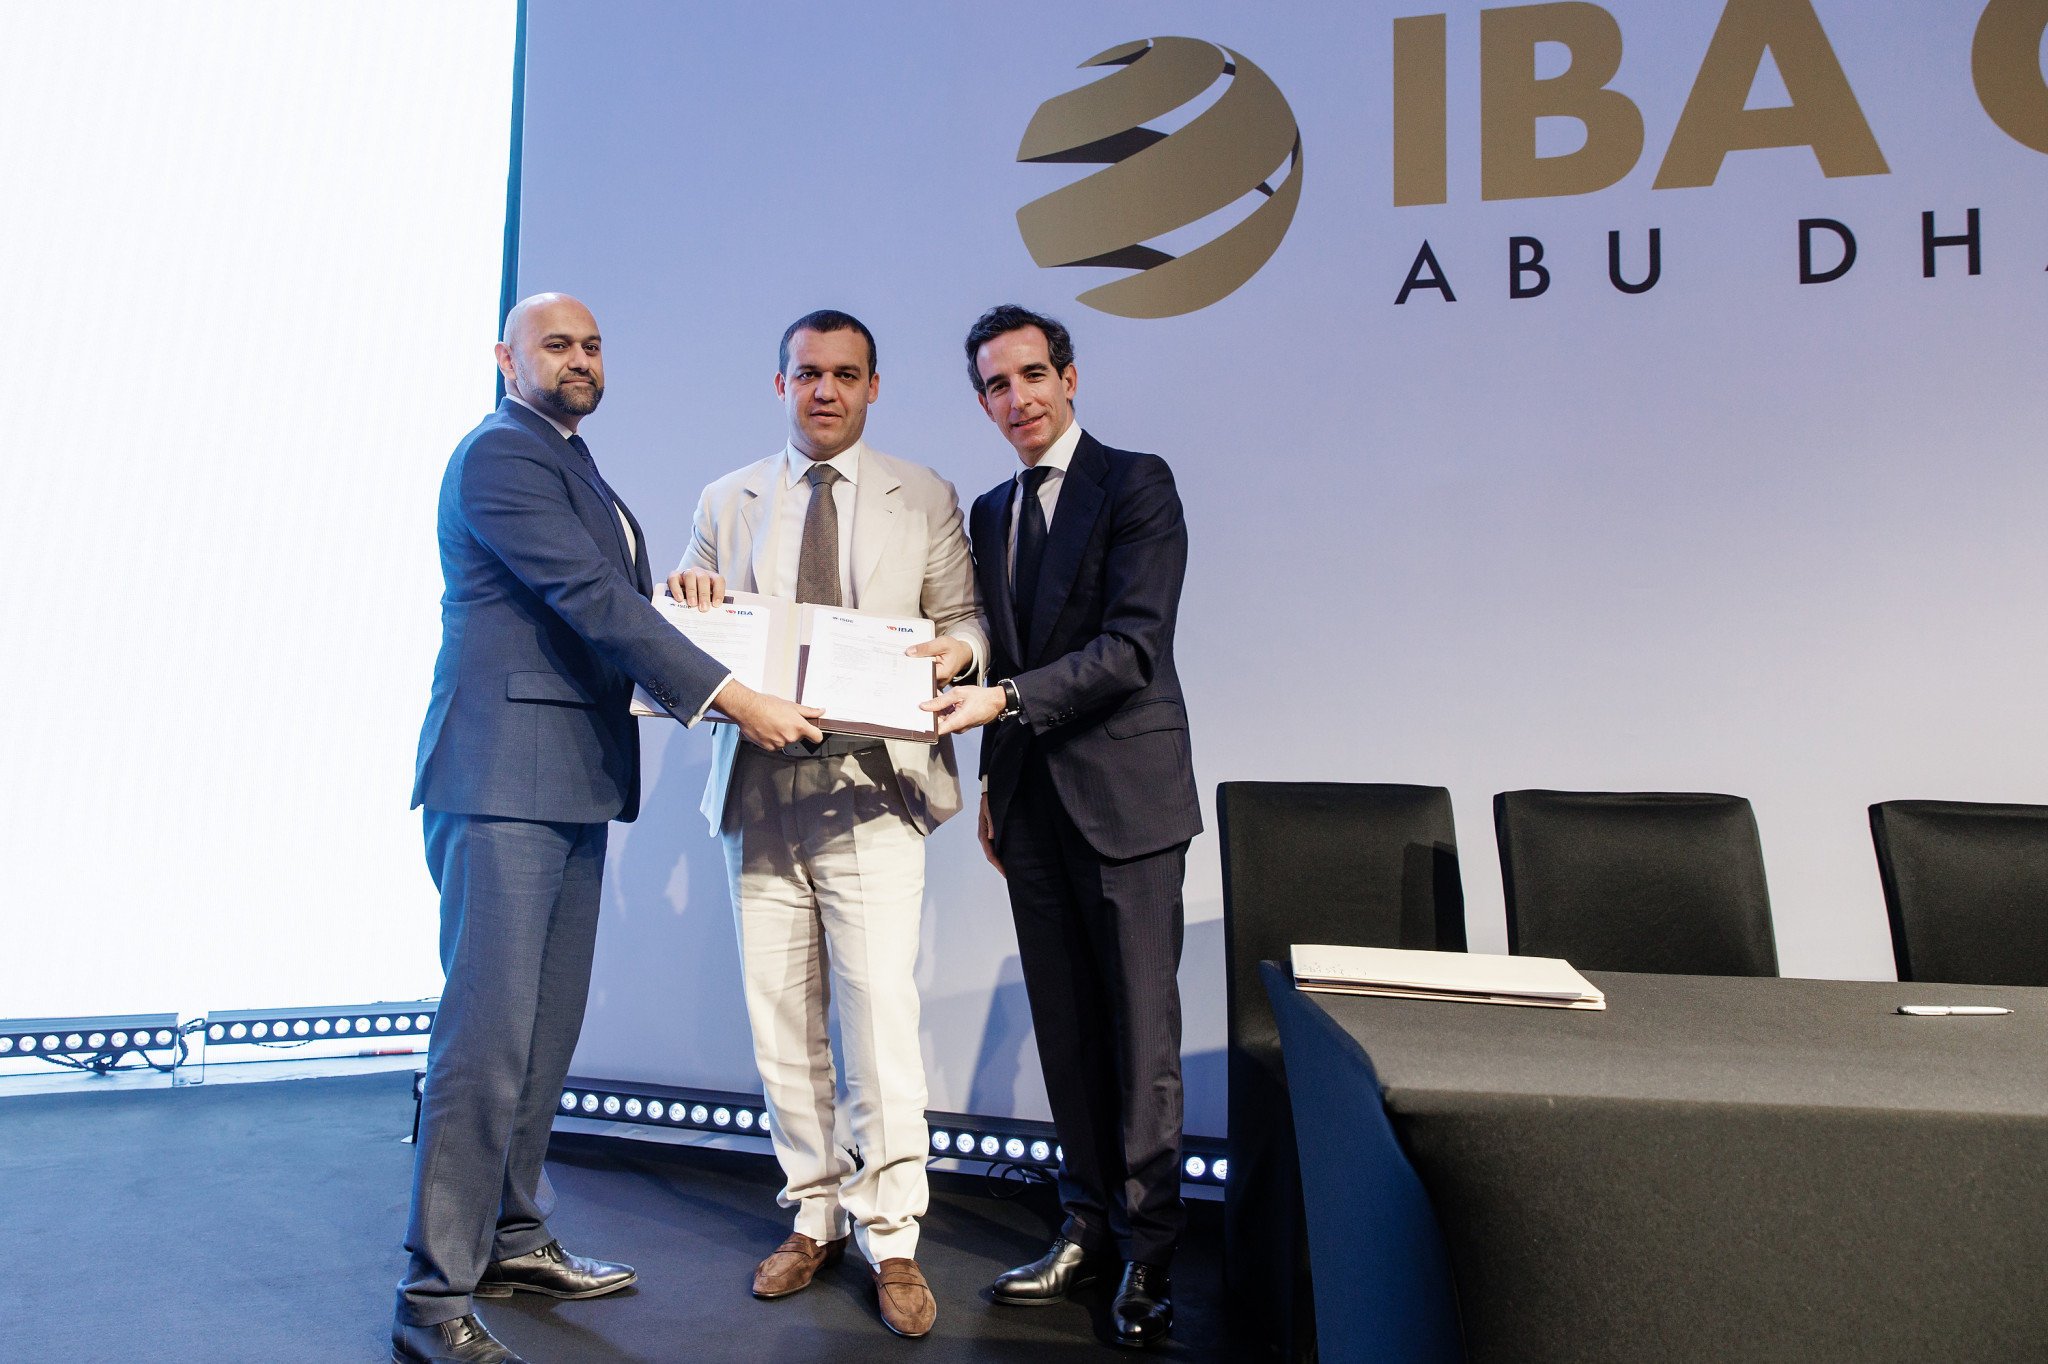 With the partnership, the IBA hopes to provide athletes with careers outside of boxing once their life as an athlete comes to an end ©IBA